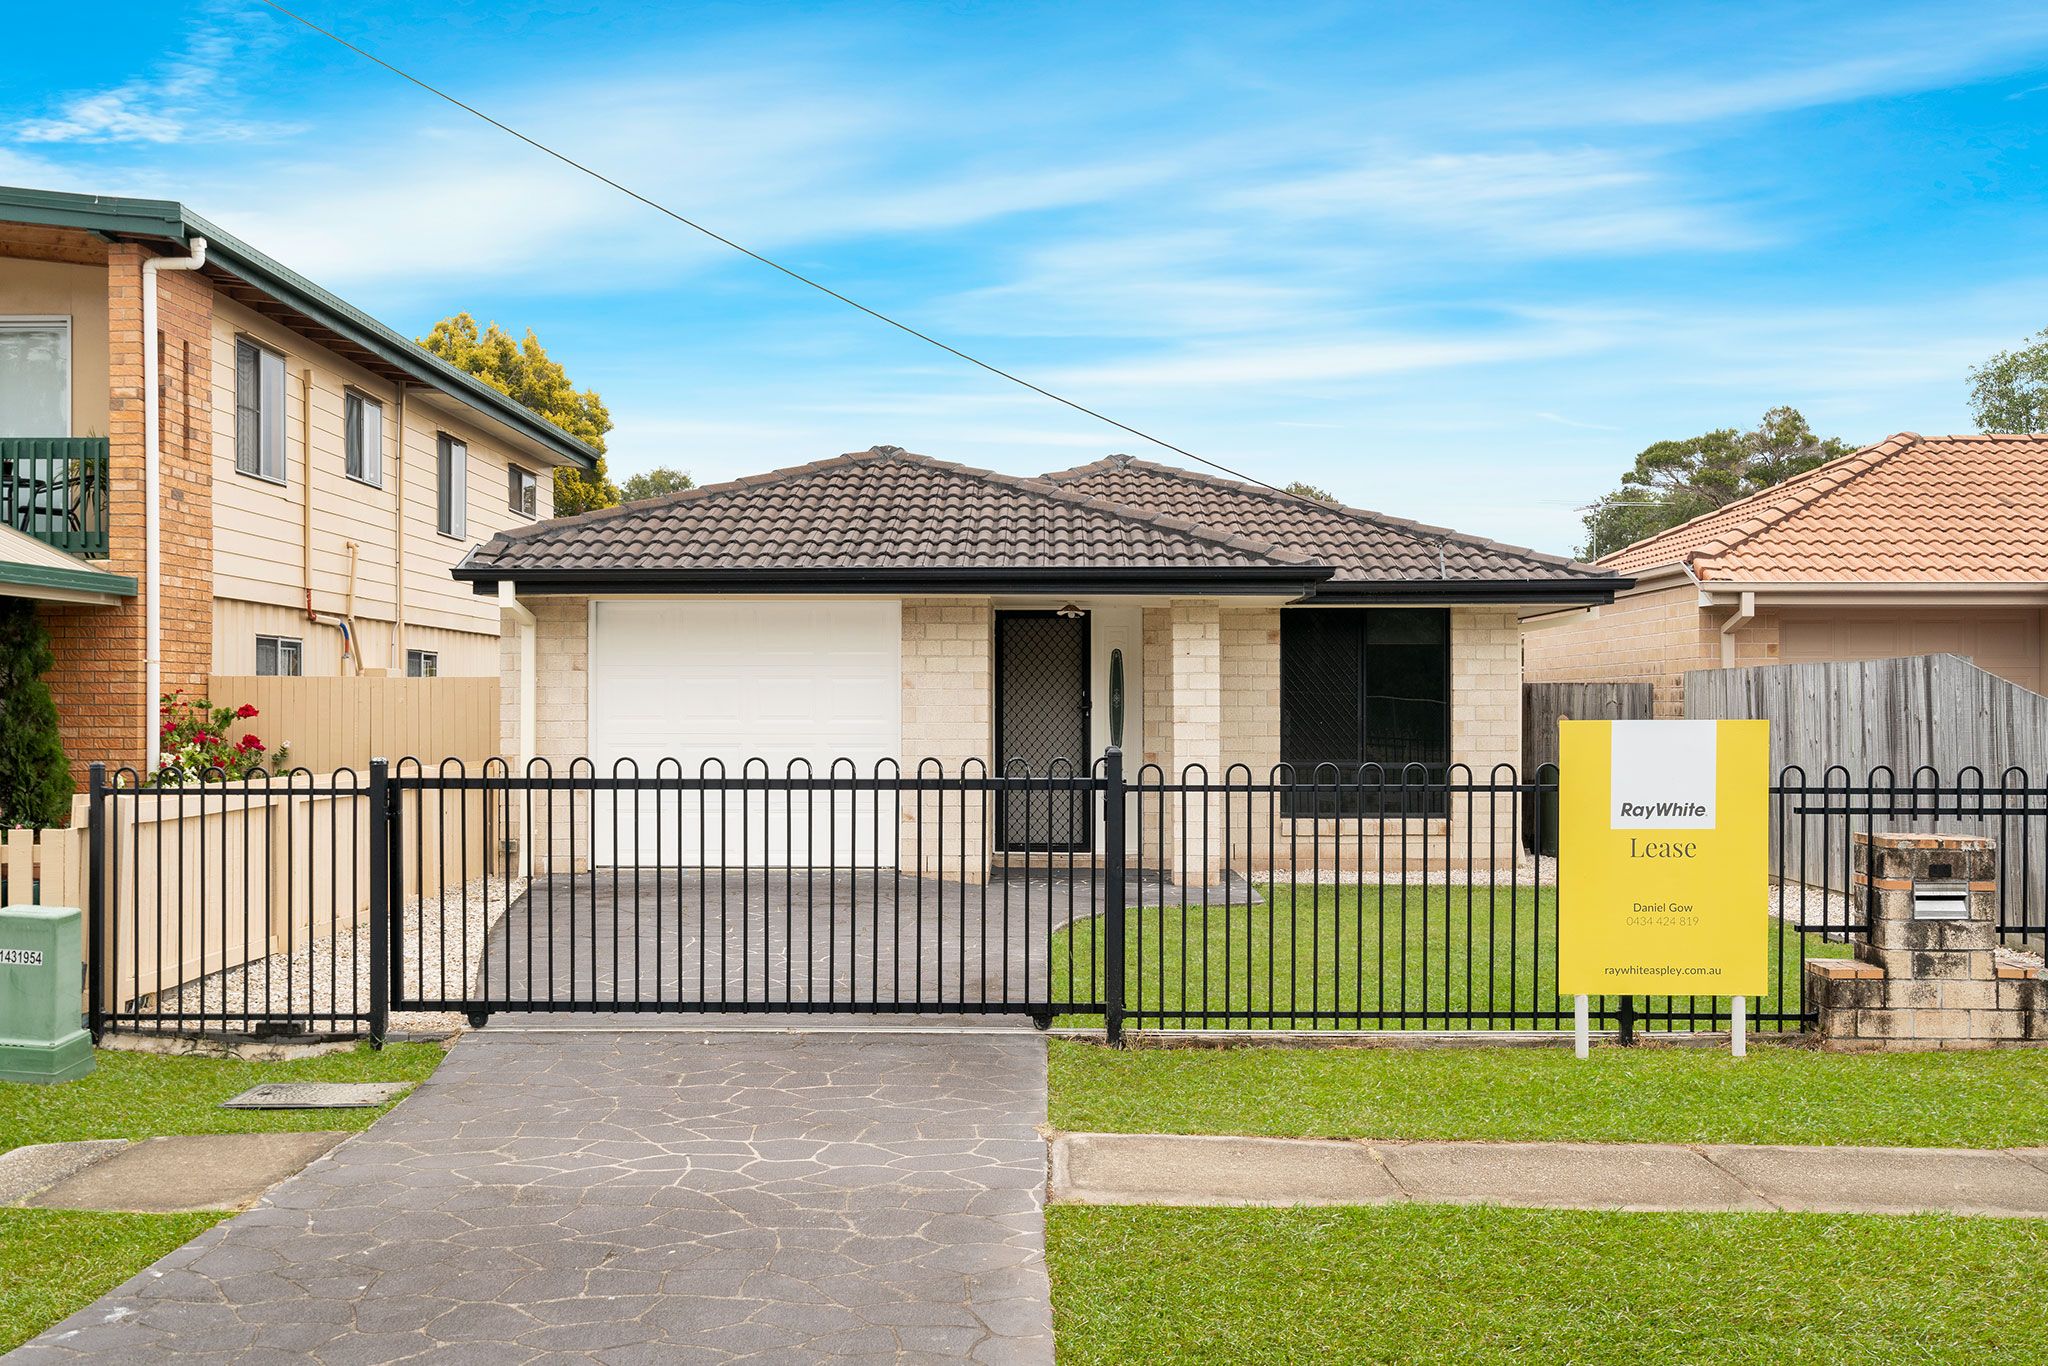 Leased House 33 Aberdeen Parade, Boondall QLD 4034 Jun 5, 2020 Homely